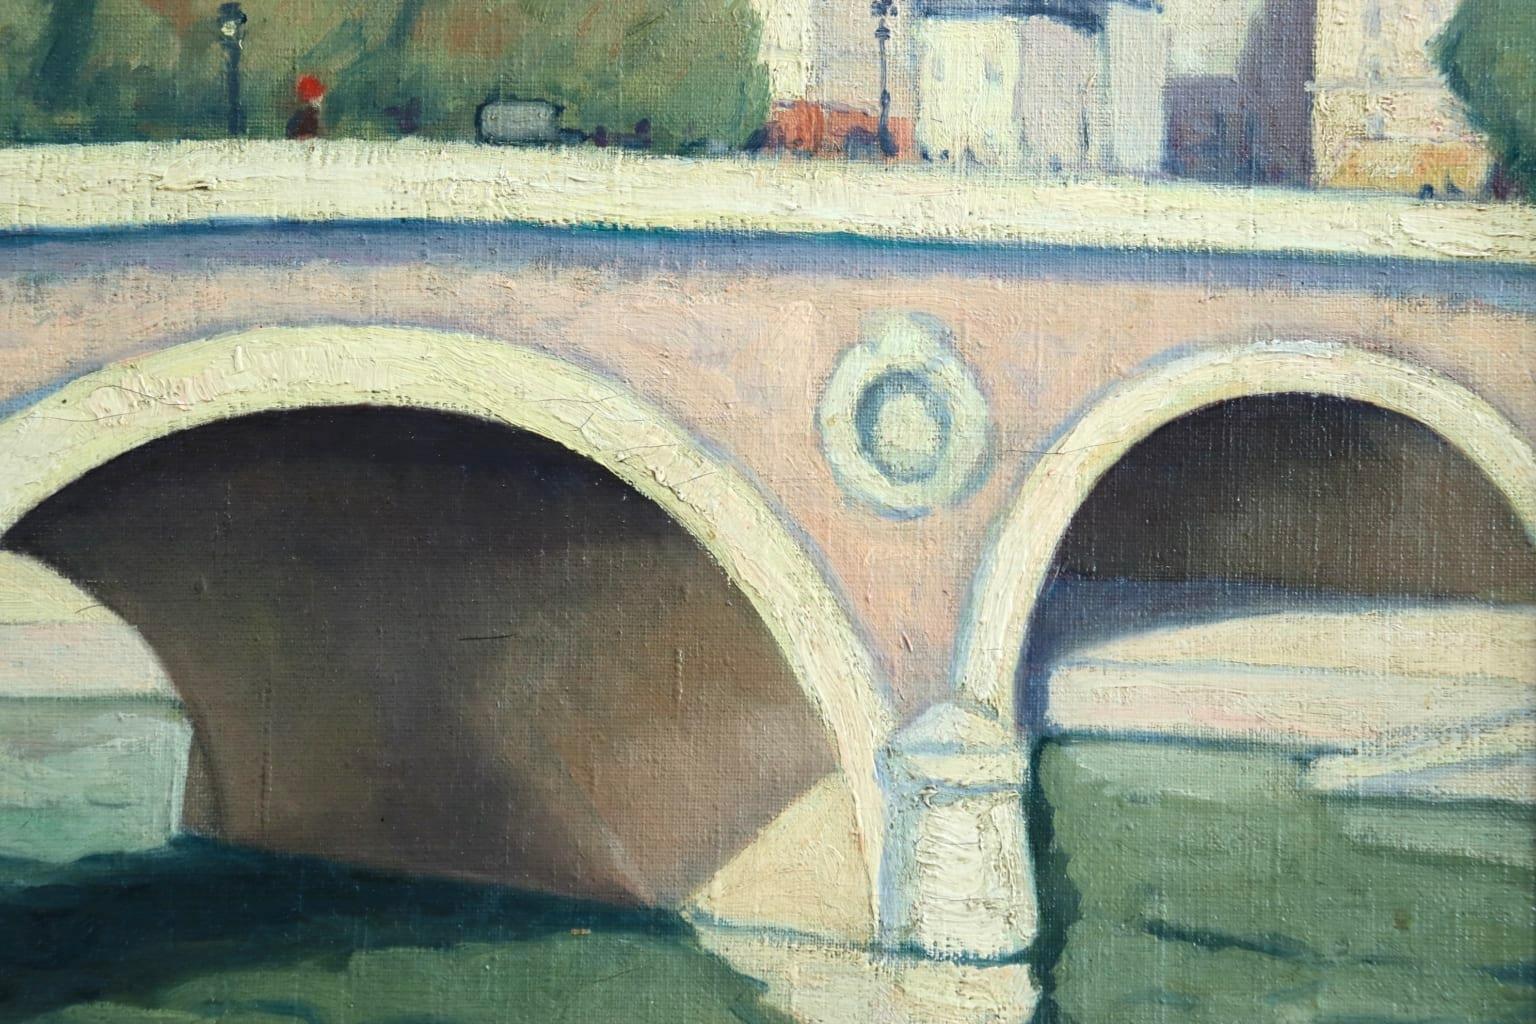 A beautiful oil on canvas by Latvian-born post impressionist painter Constantin Kluge. The work shows figures on the Pont Louis Philippe bridge over the River Seine, Paris with the Eglise Saint Gervais in the background. Signed lower